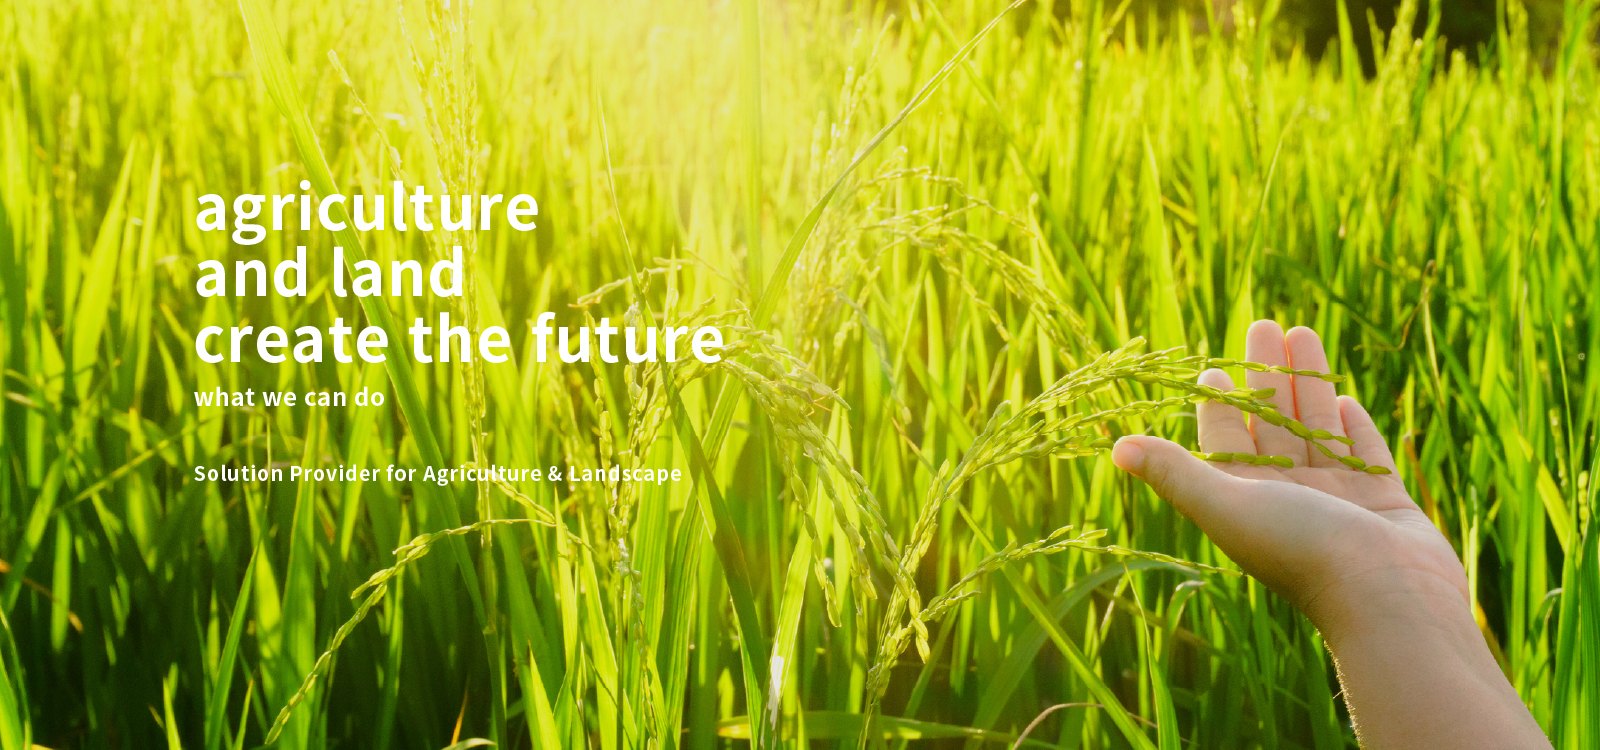 agriculture and land create the future